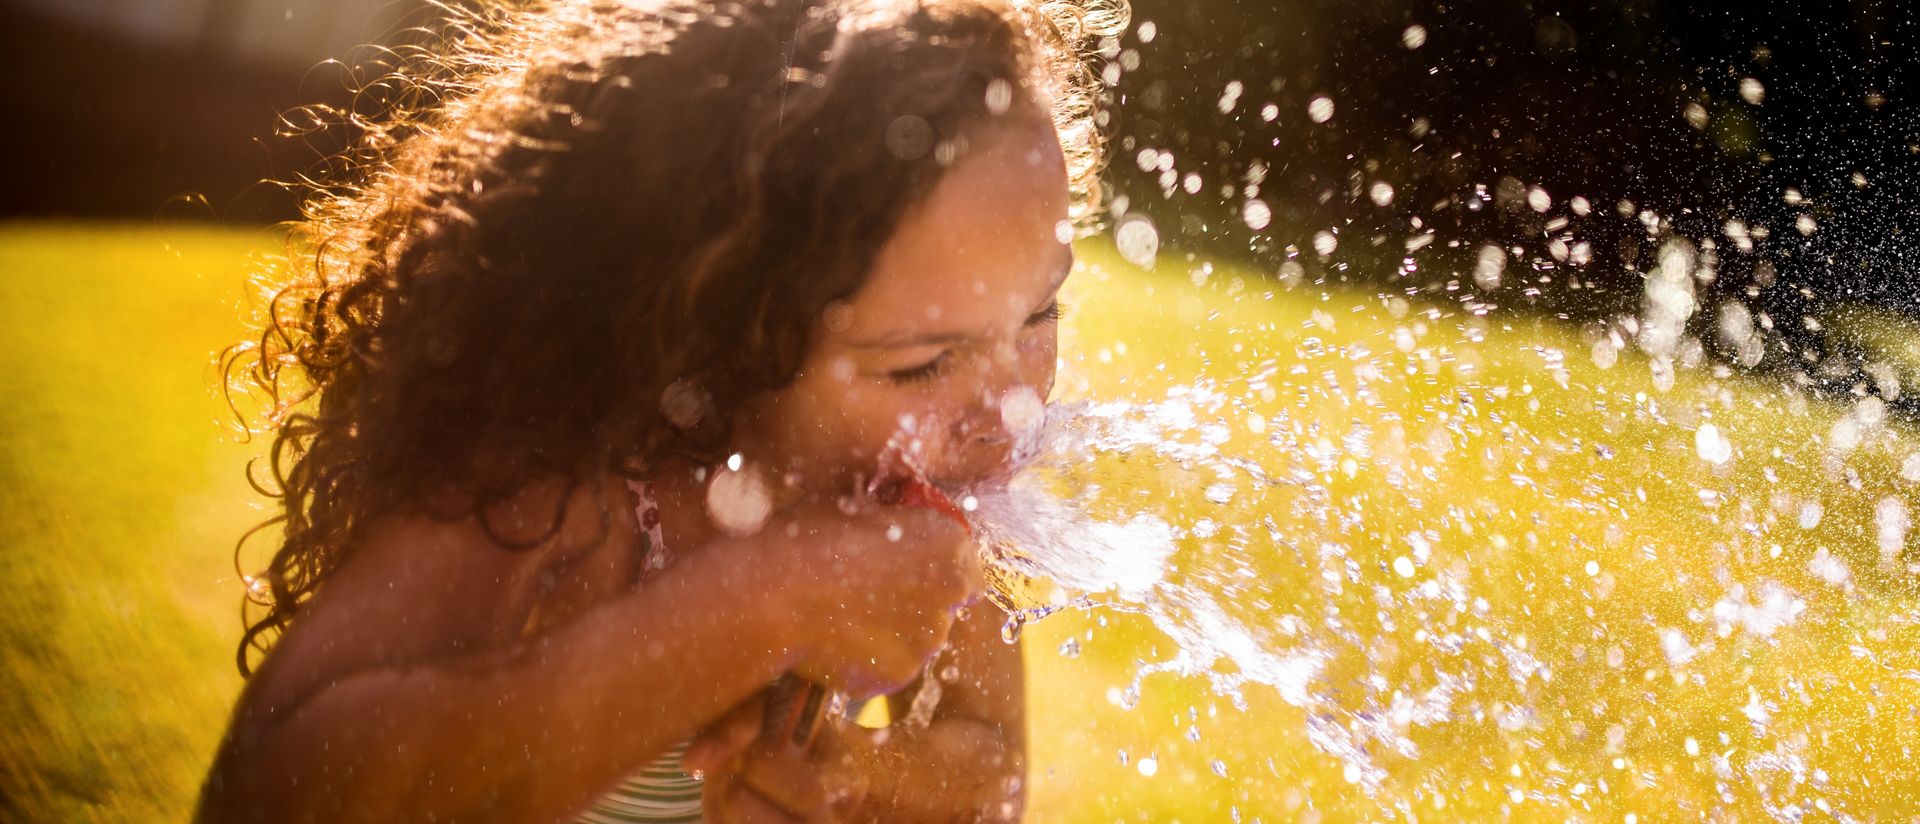 Girl drinking water from hose